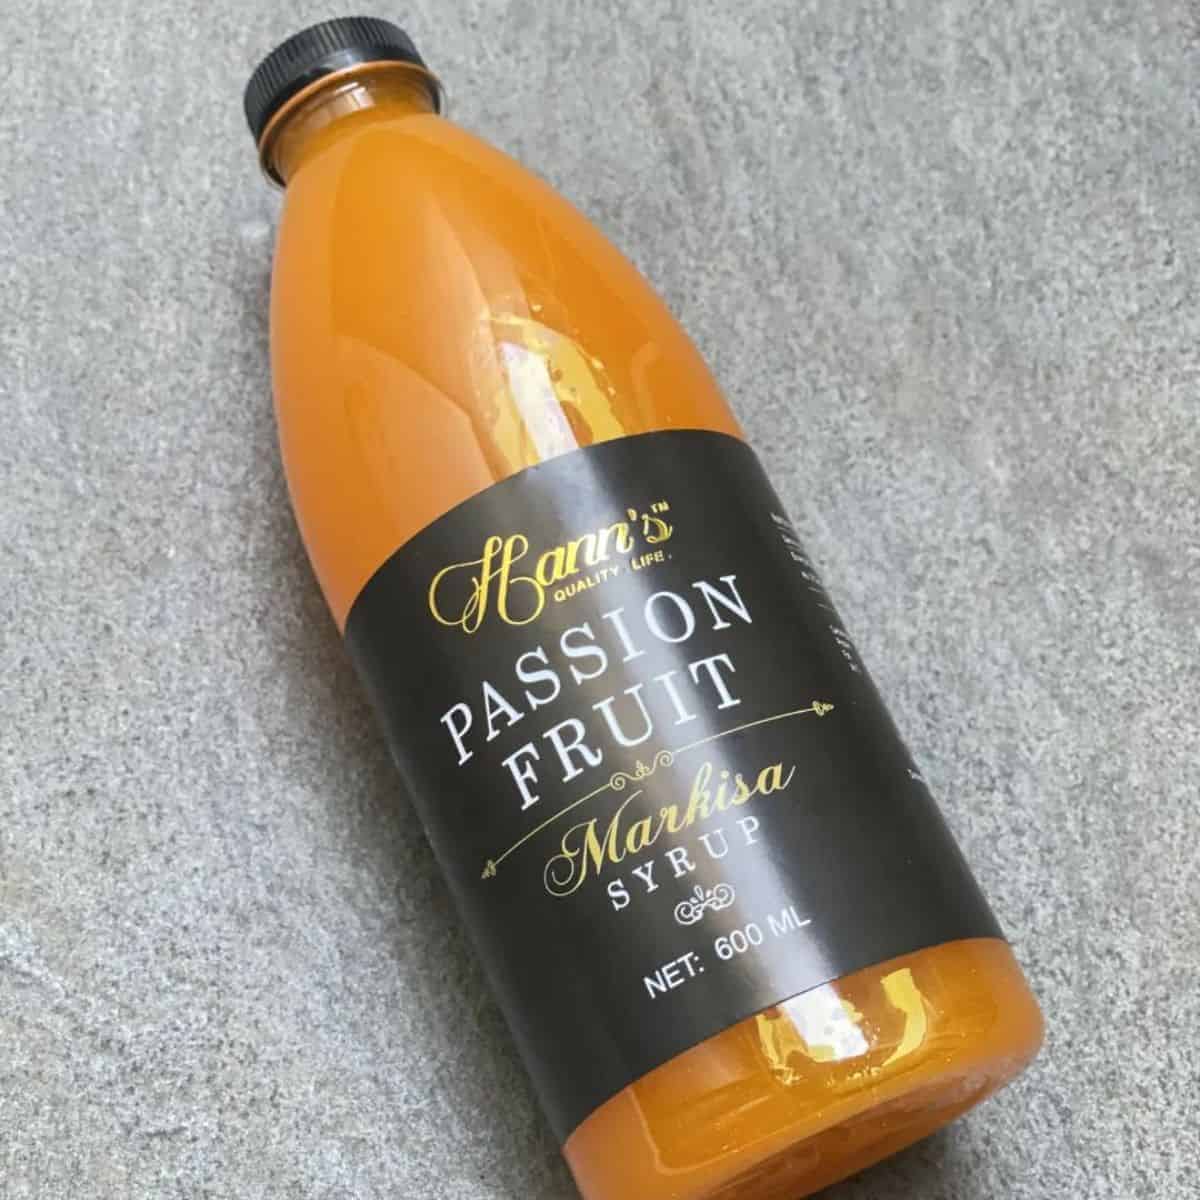 Orangey liquid sweetener in a large bottle with black labelling